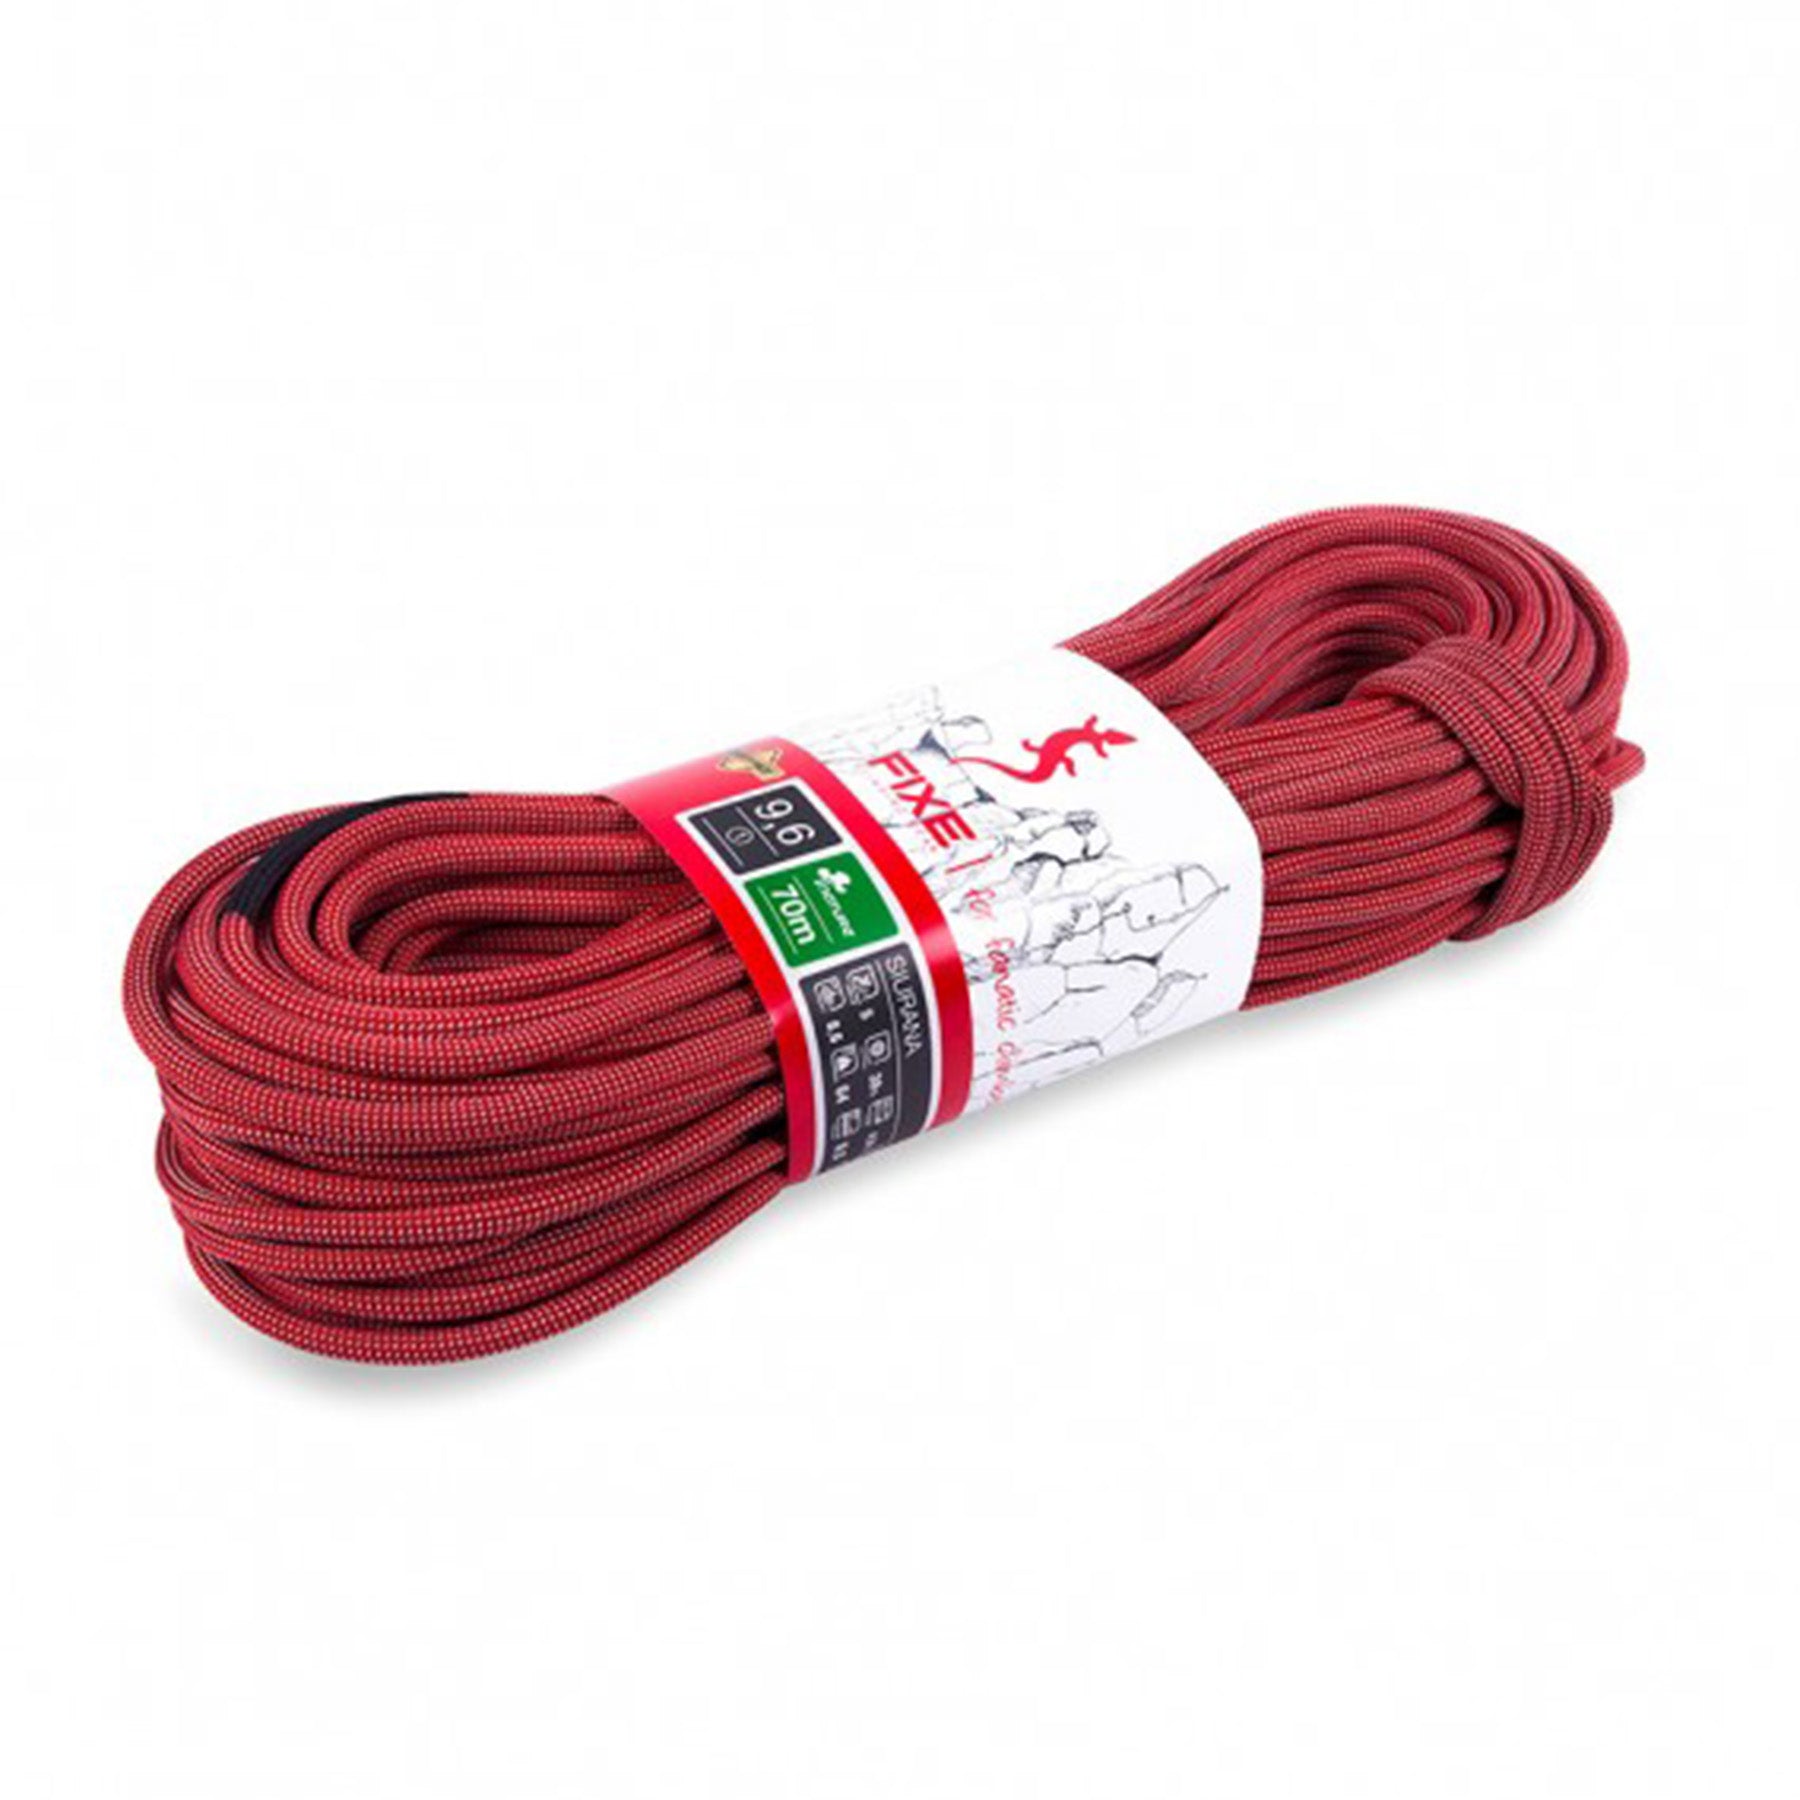 the fixe siurana rope in manufacturer's coil